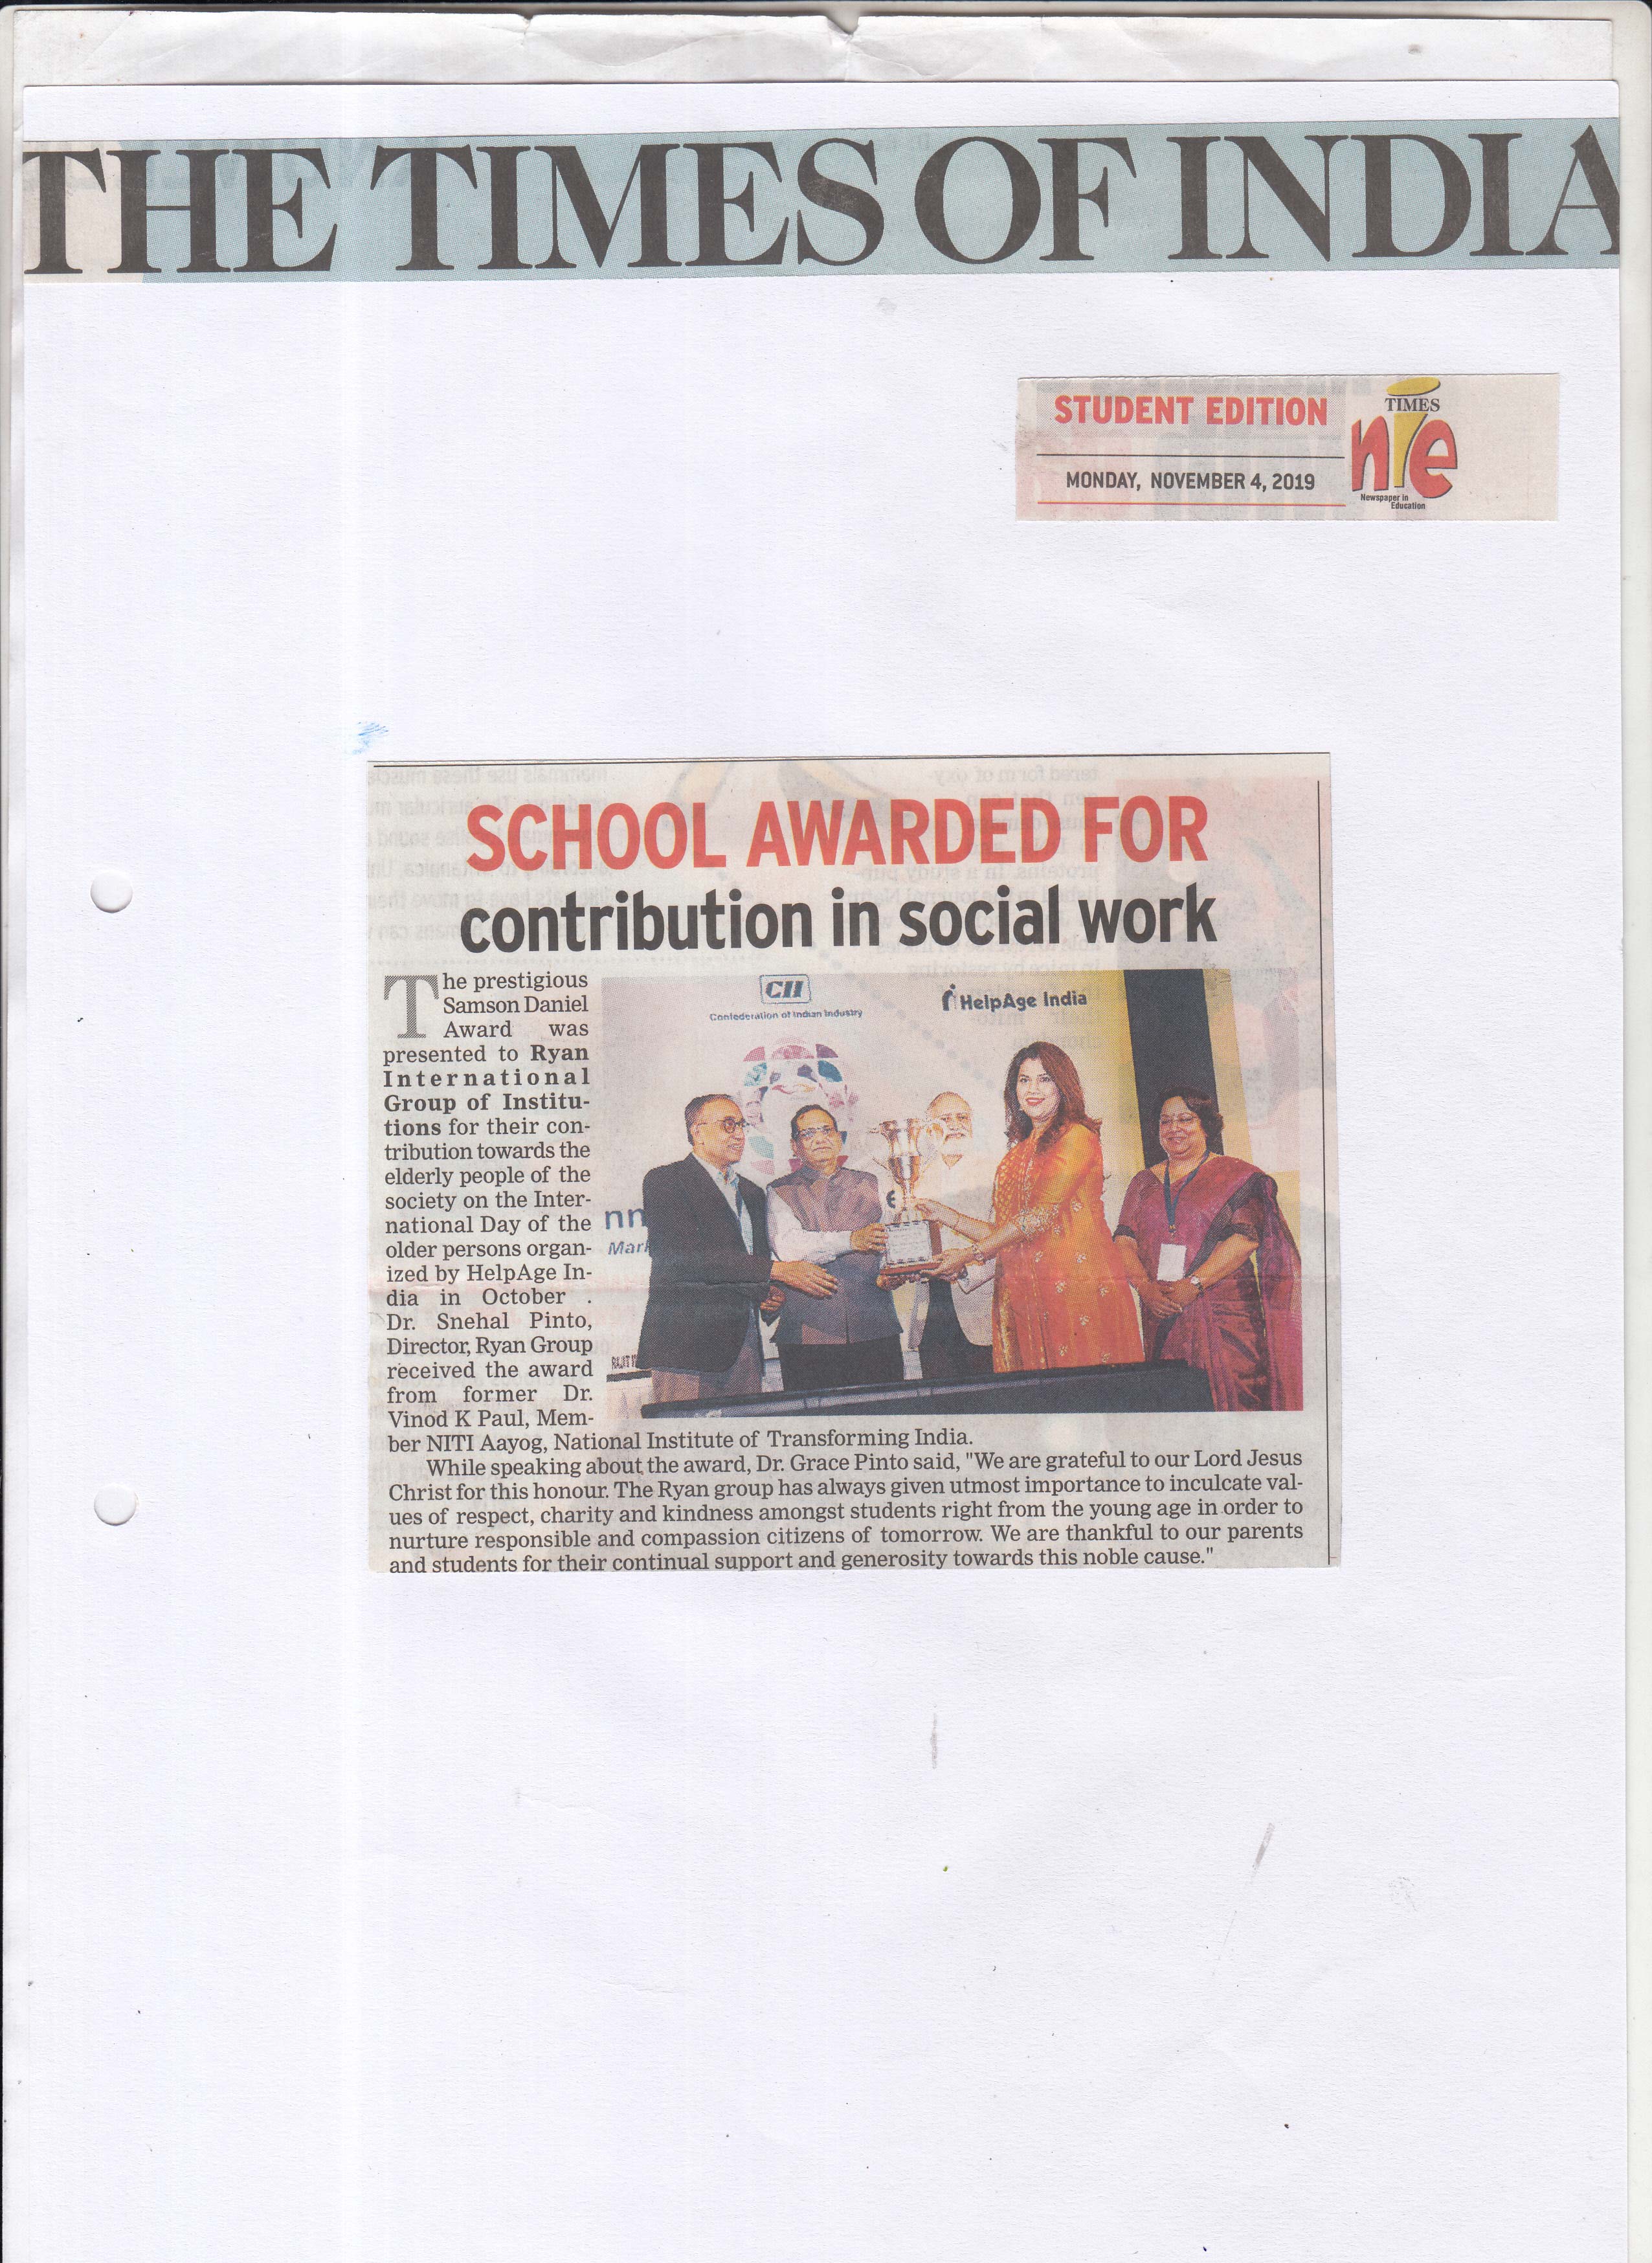 School awarded for contribution in Social Work